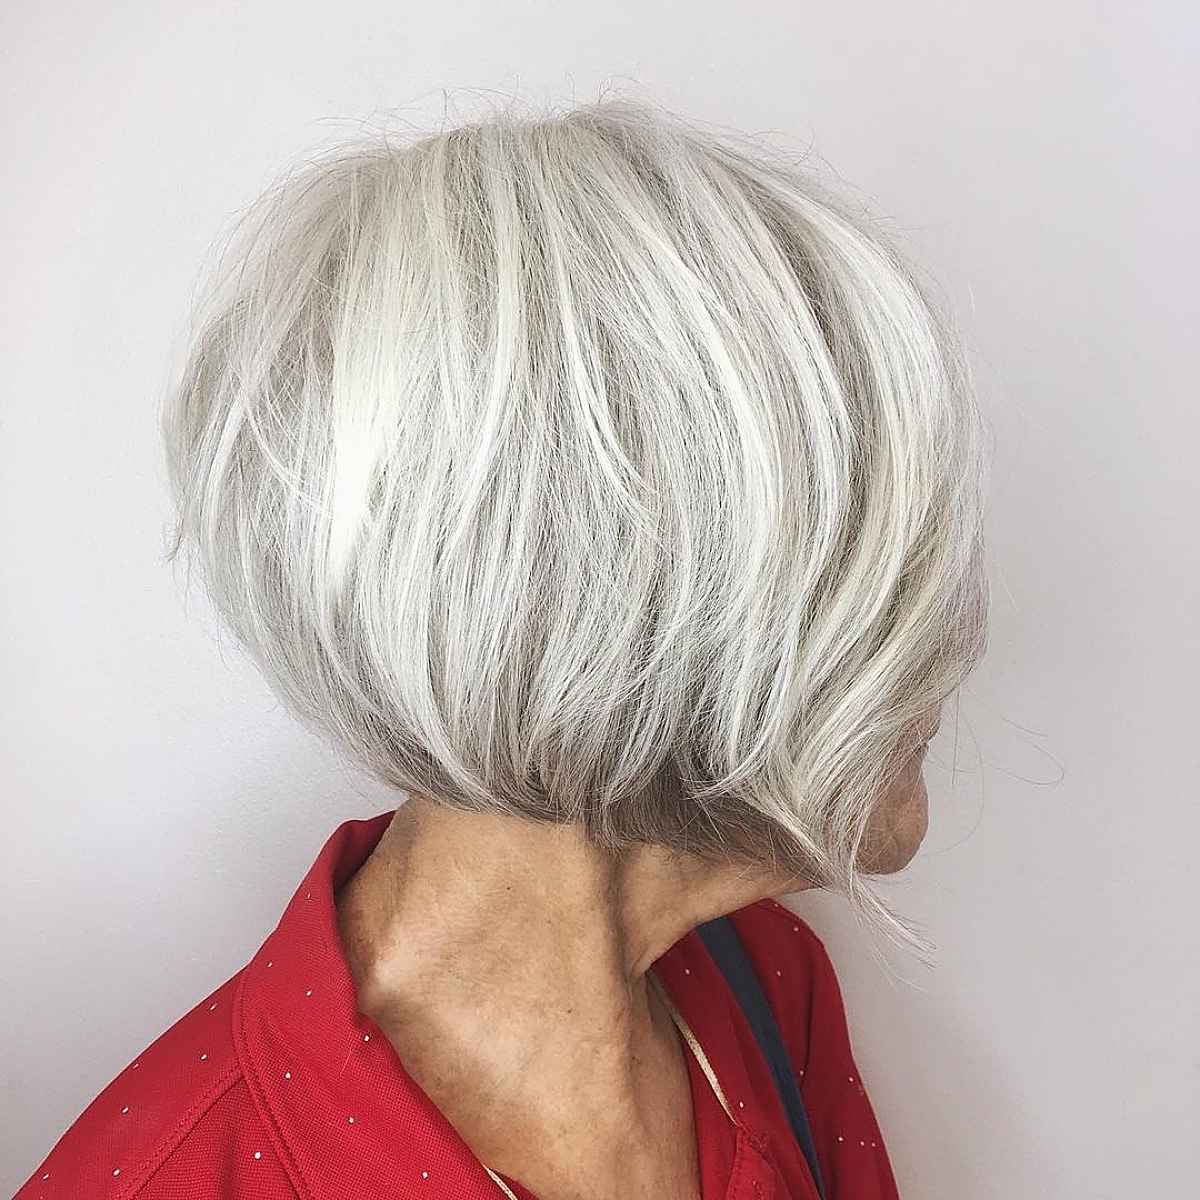 Short layered hairstyle for ladies over 60 with grey thick hair